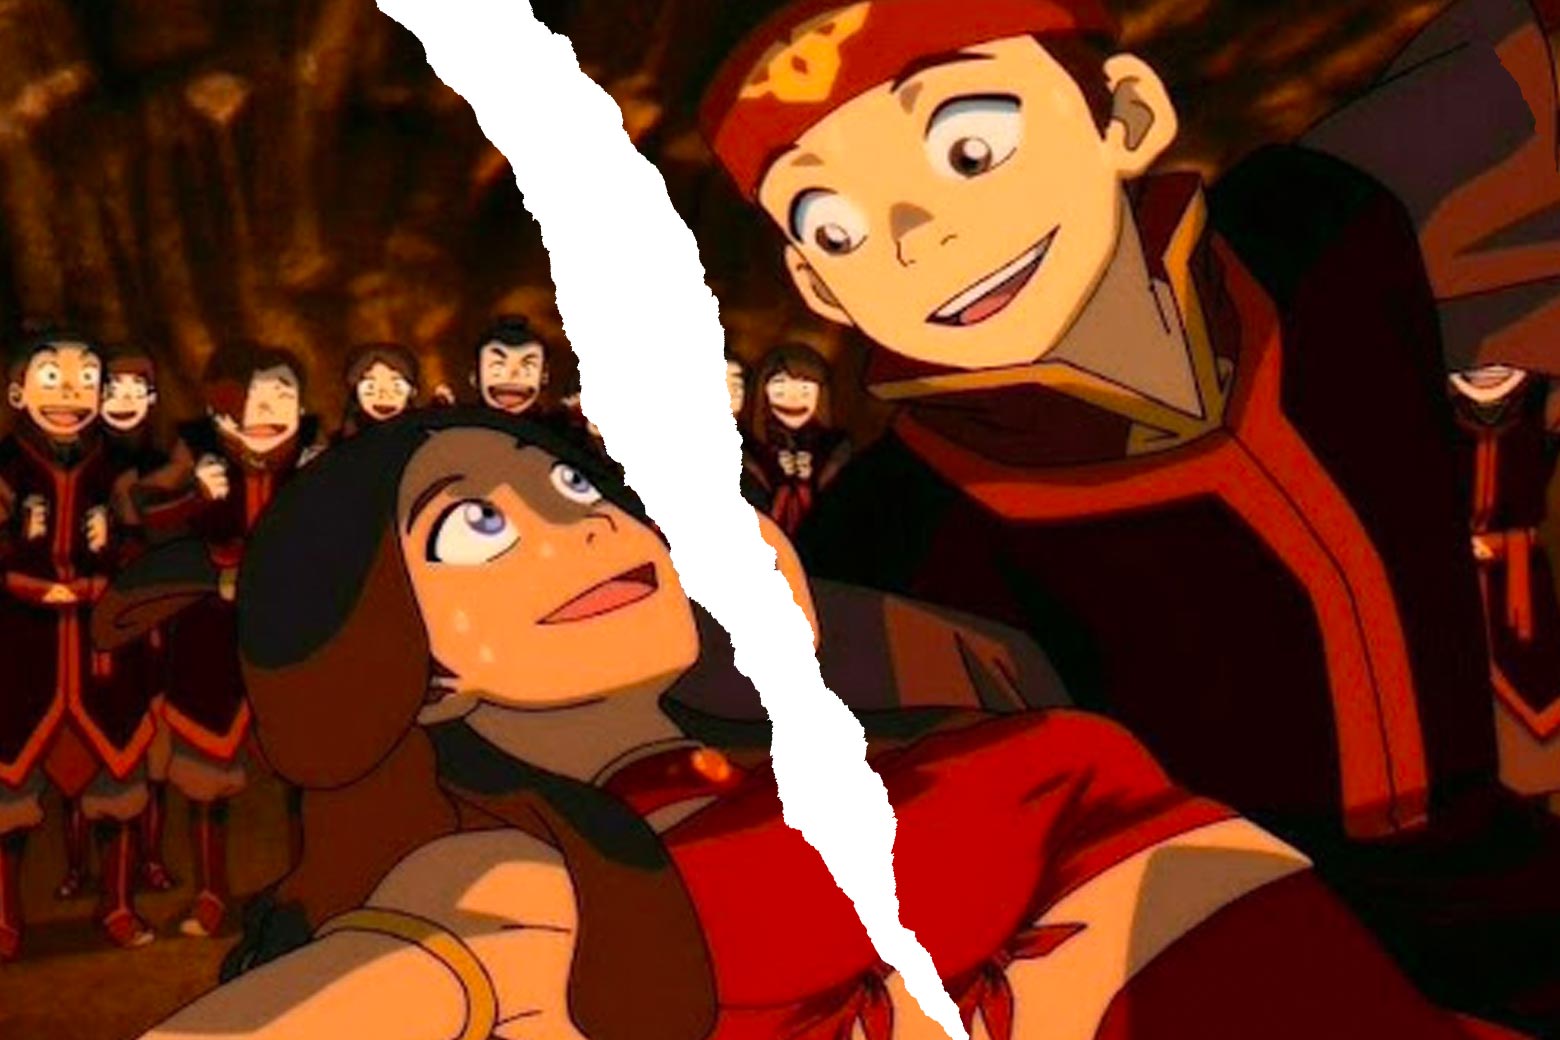 Avatar: The Last Airbender's Katara should've ended up with Zuko, not Aang.